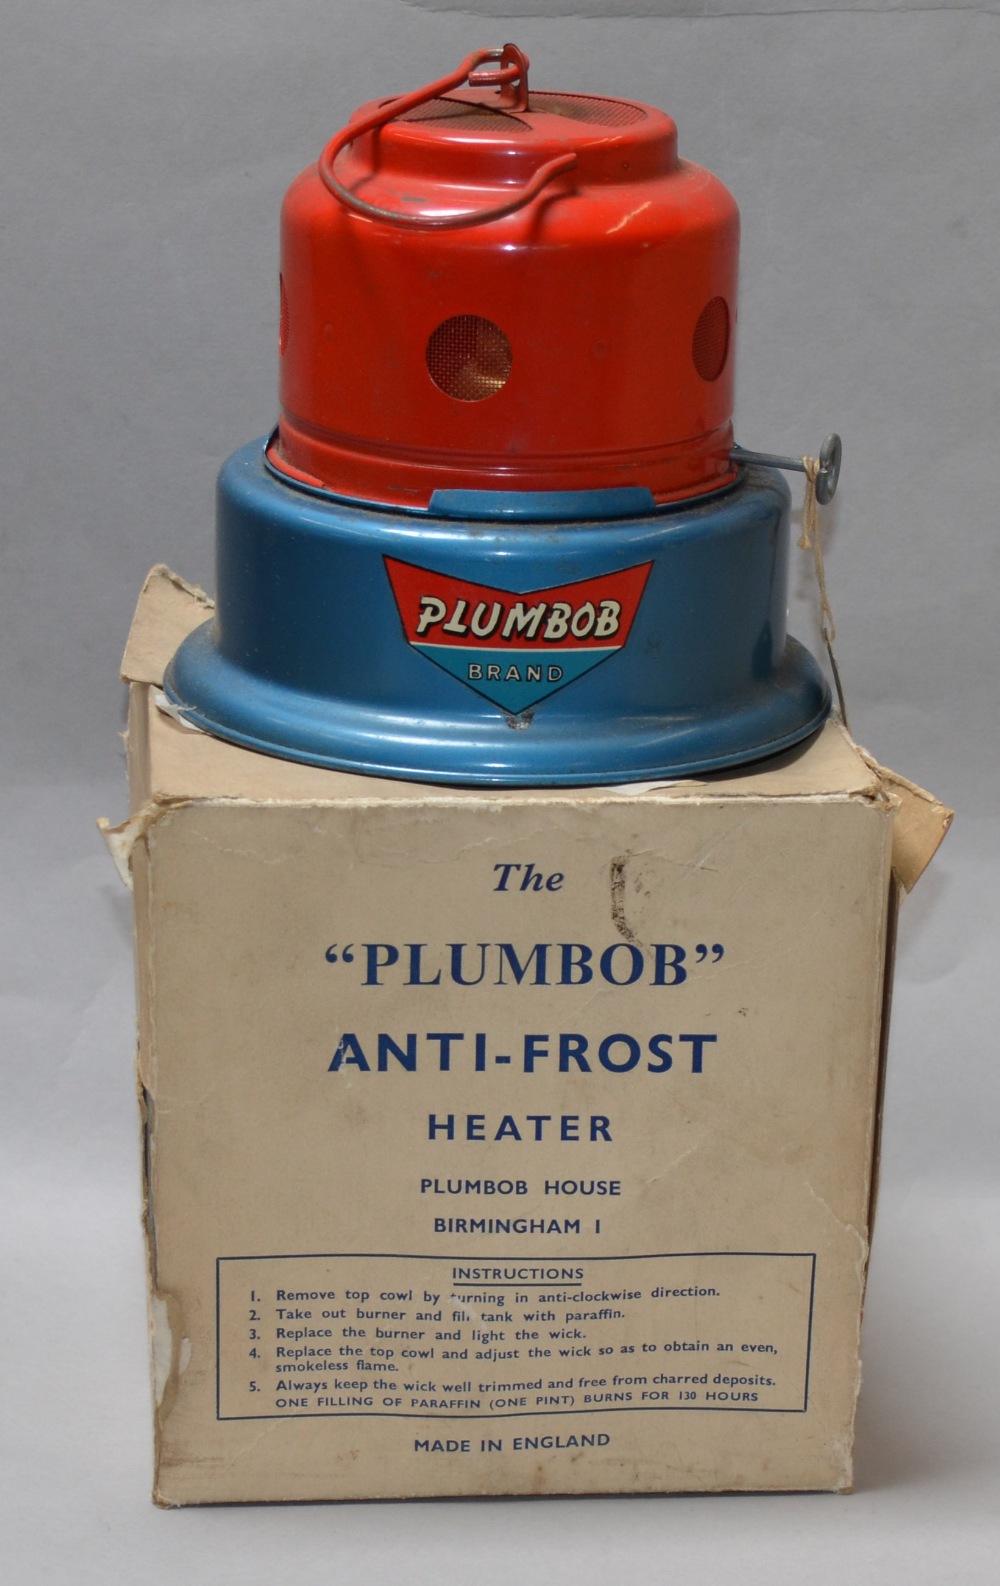 A vintage Plumbob Anti-Frost Heater in red and blue.